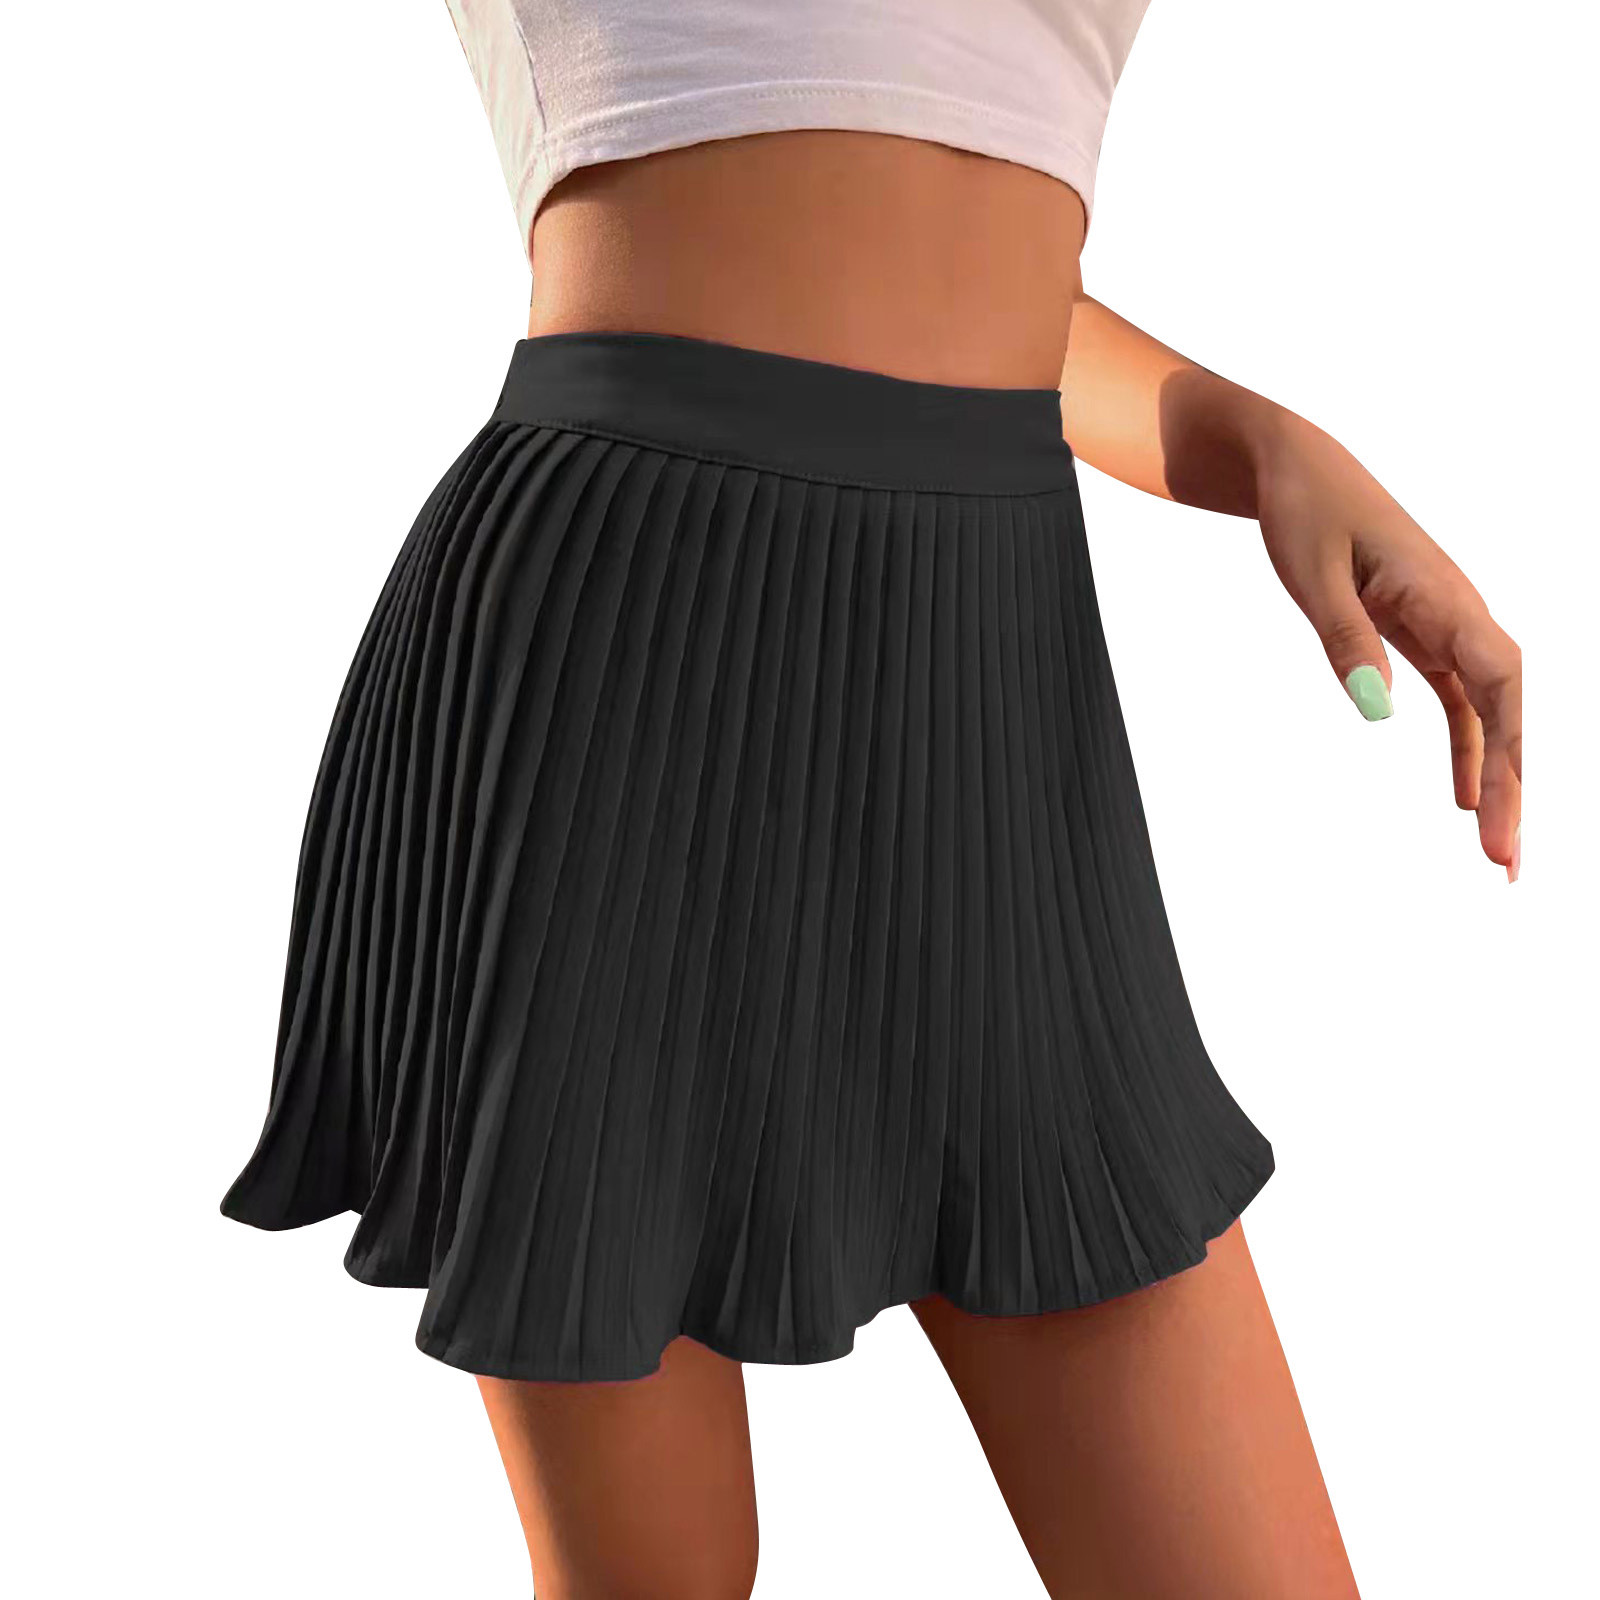 Skirts for Women Women's Summer Empire Waist Ruffle Tiered Pleated Mini Skirt Solid Color A Line Beach Cute Skirt Women's Skirts Black XL - image 2 of 5